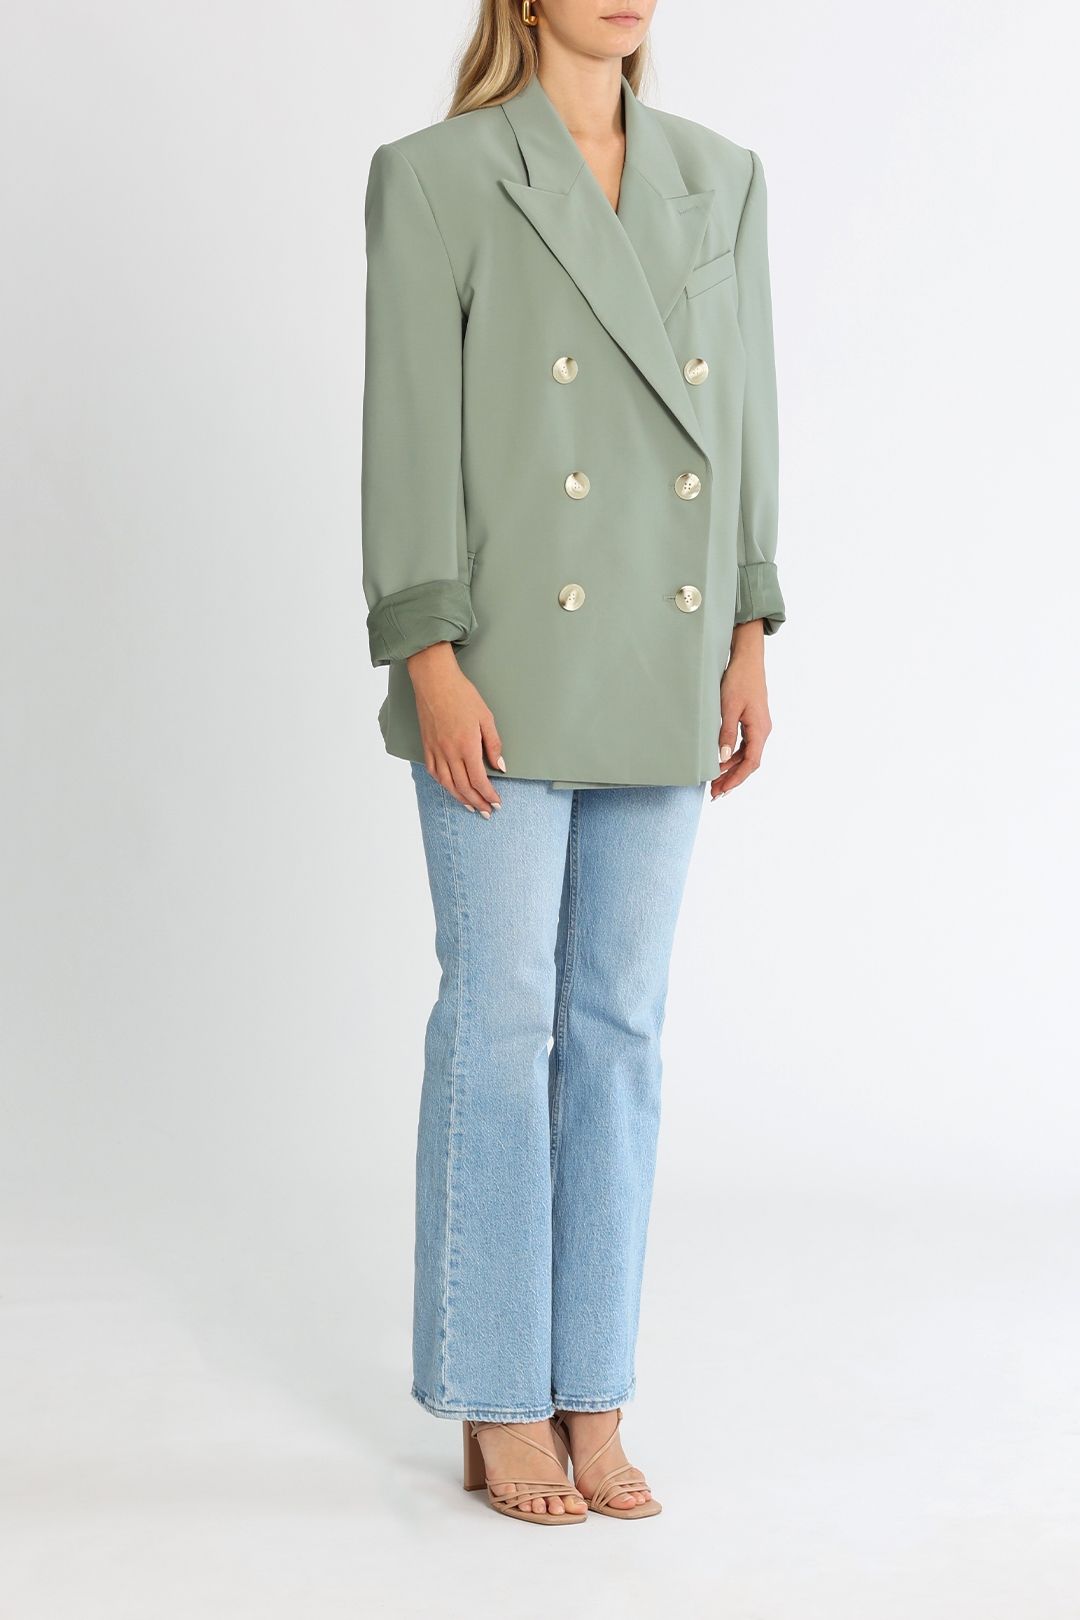 Camilla and Marc Aston Jacket Dusty Jade Double Breasted Closure